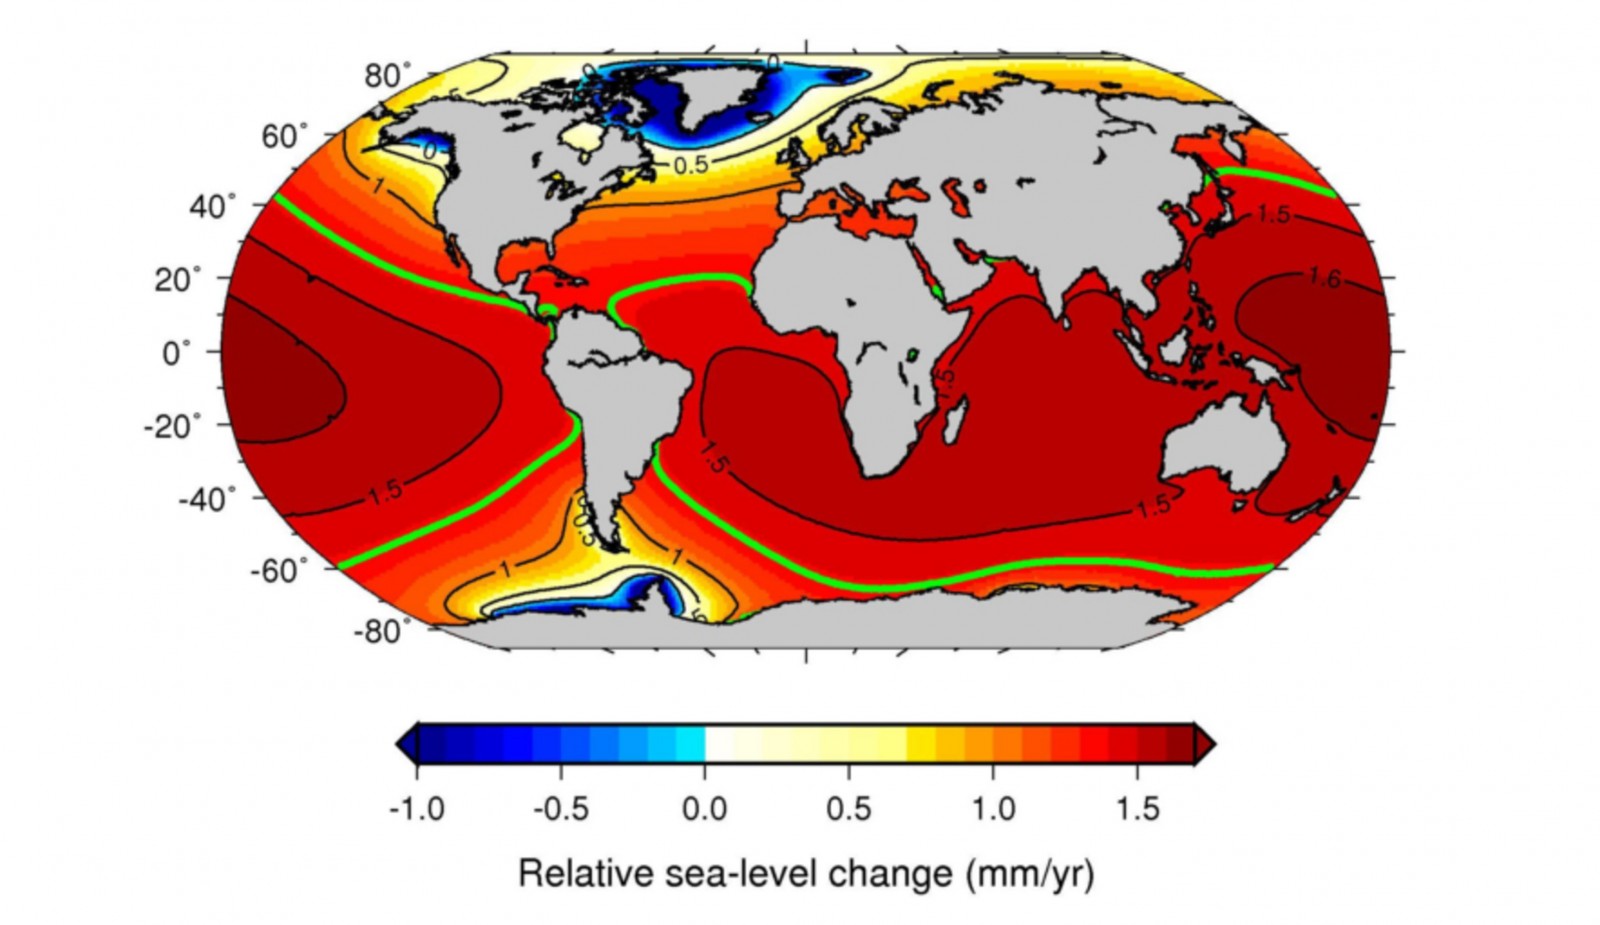 Figure 4: Melting land ice masses effect on sea level variations for the period 2000-2008 (Bamber and Riva, 2010, Fig. 4)